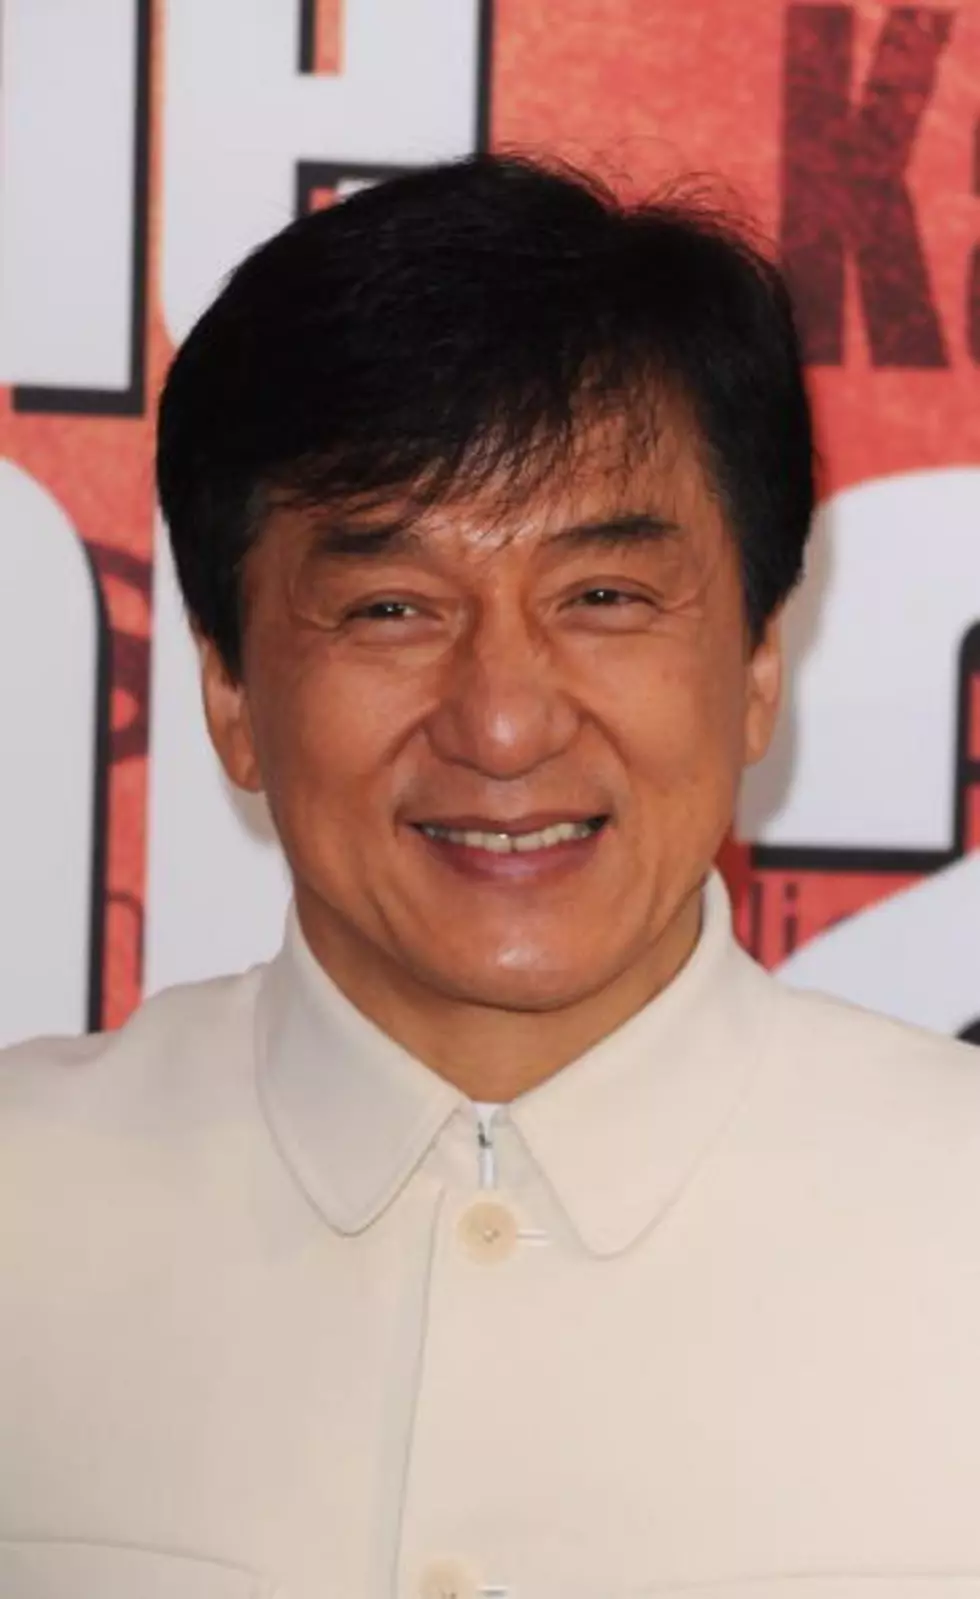 The Words Coming Out of Jackie Chan’s Mouth: Happy Birthday To Me